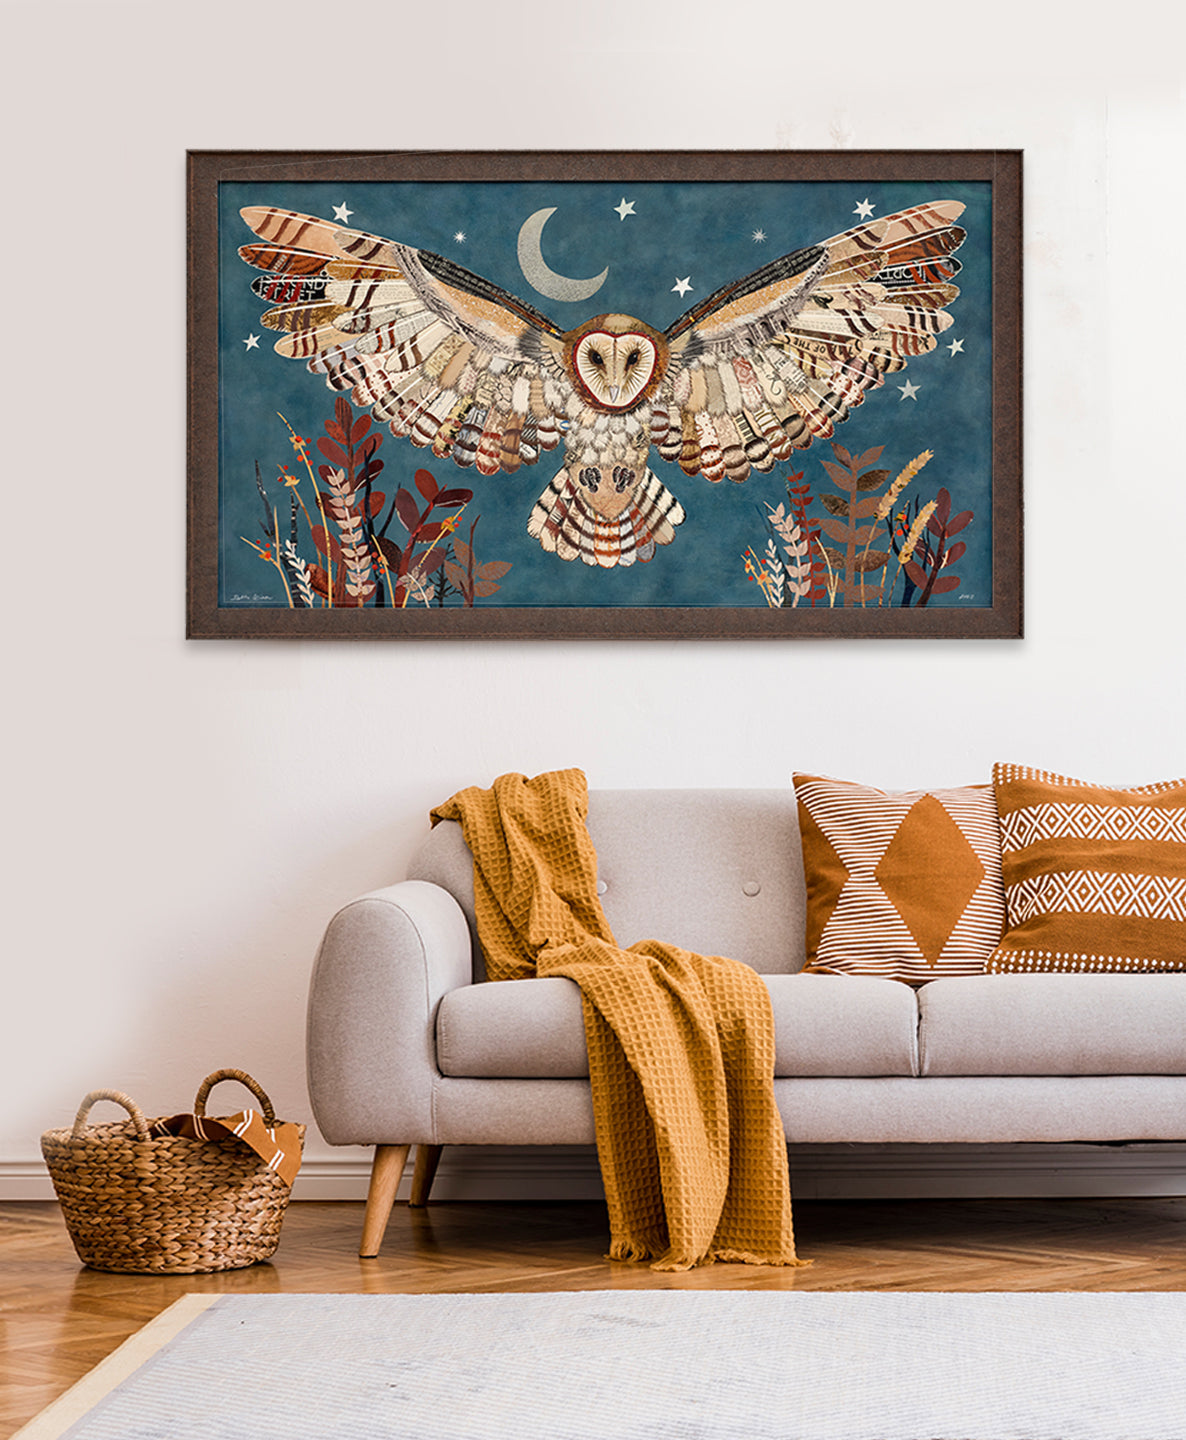 Dolan Geiman The Protector (Barn Owl) original paper collage features the striking image of an owl with wings expanded in flight against moody indigo blue backdrop. Centerpiece for the living room. 